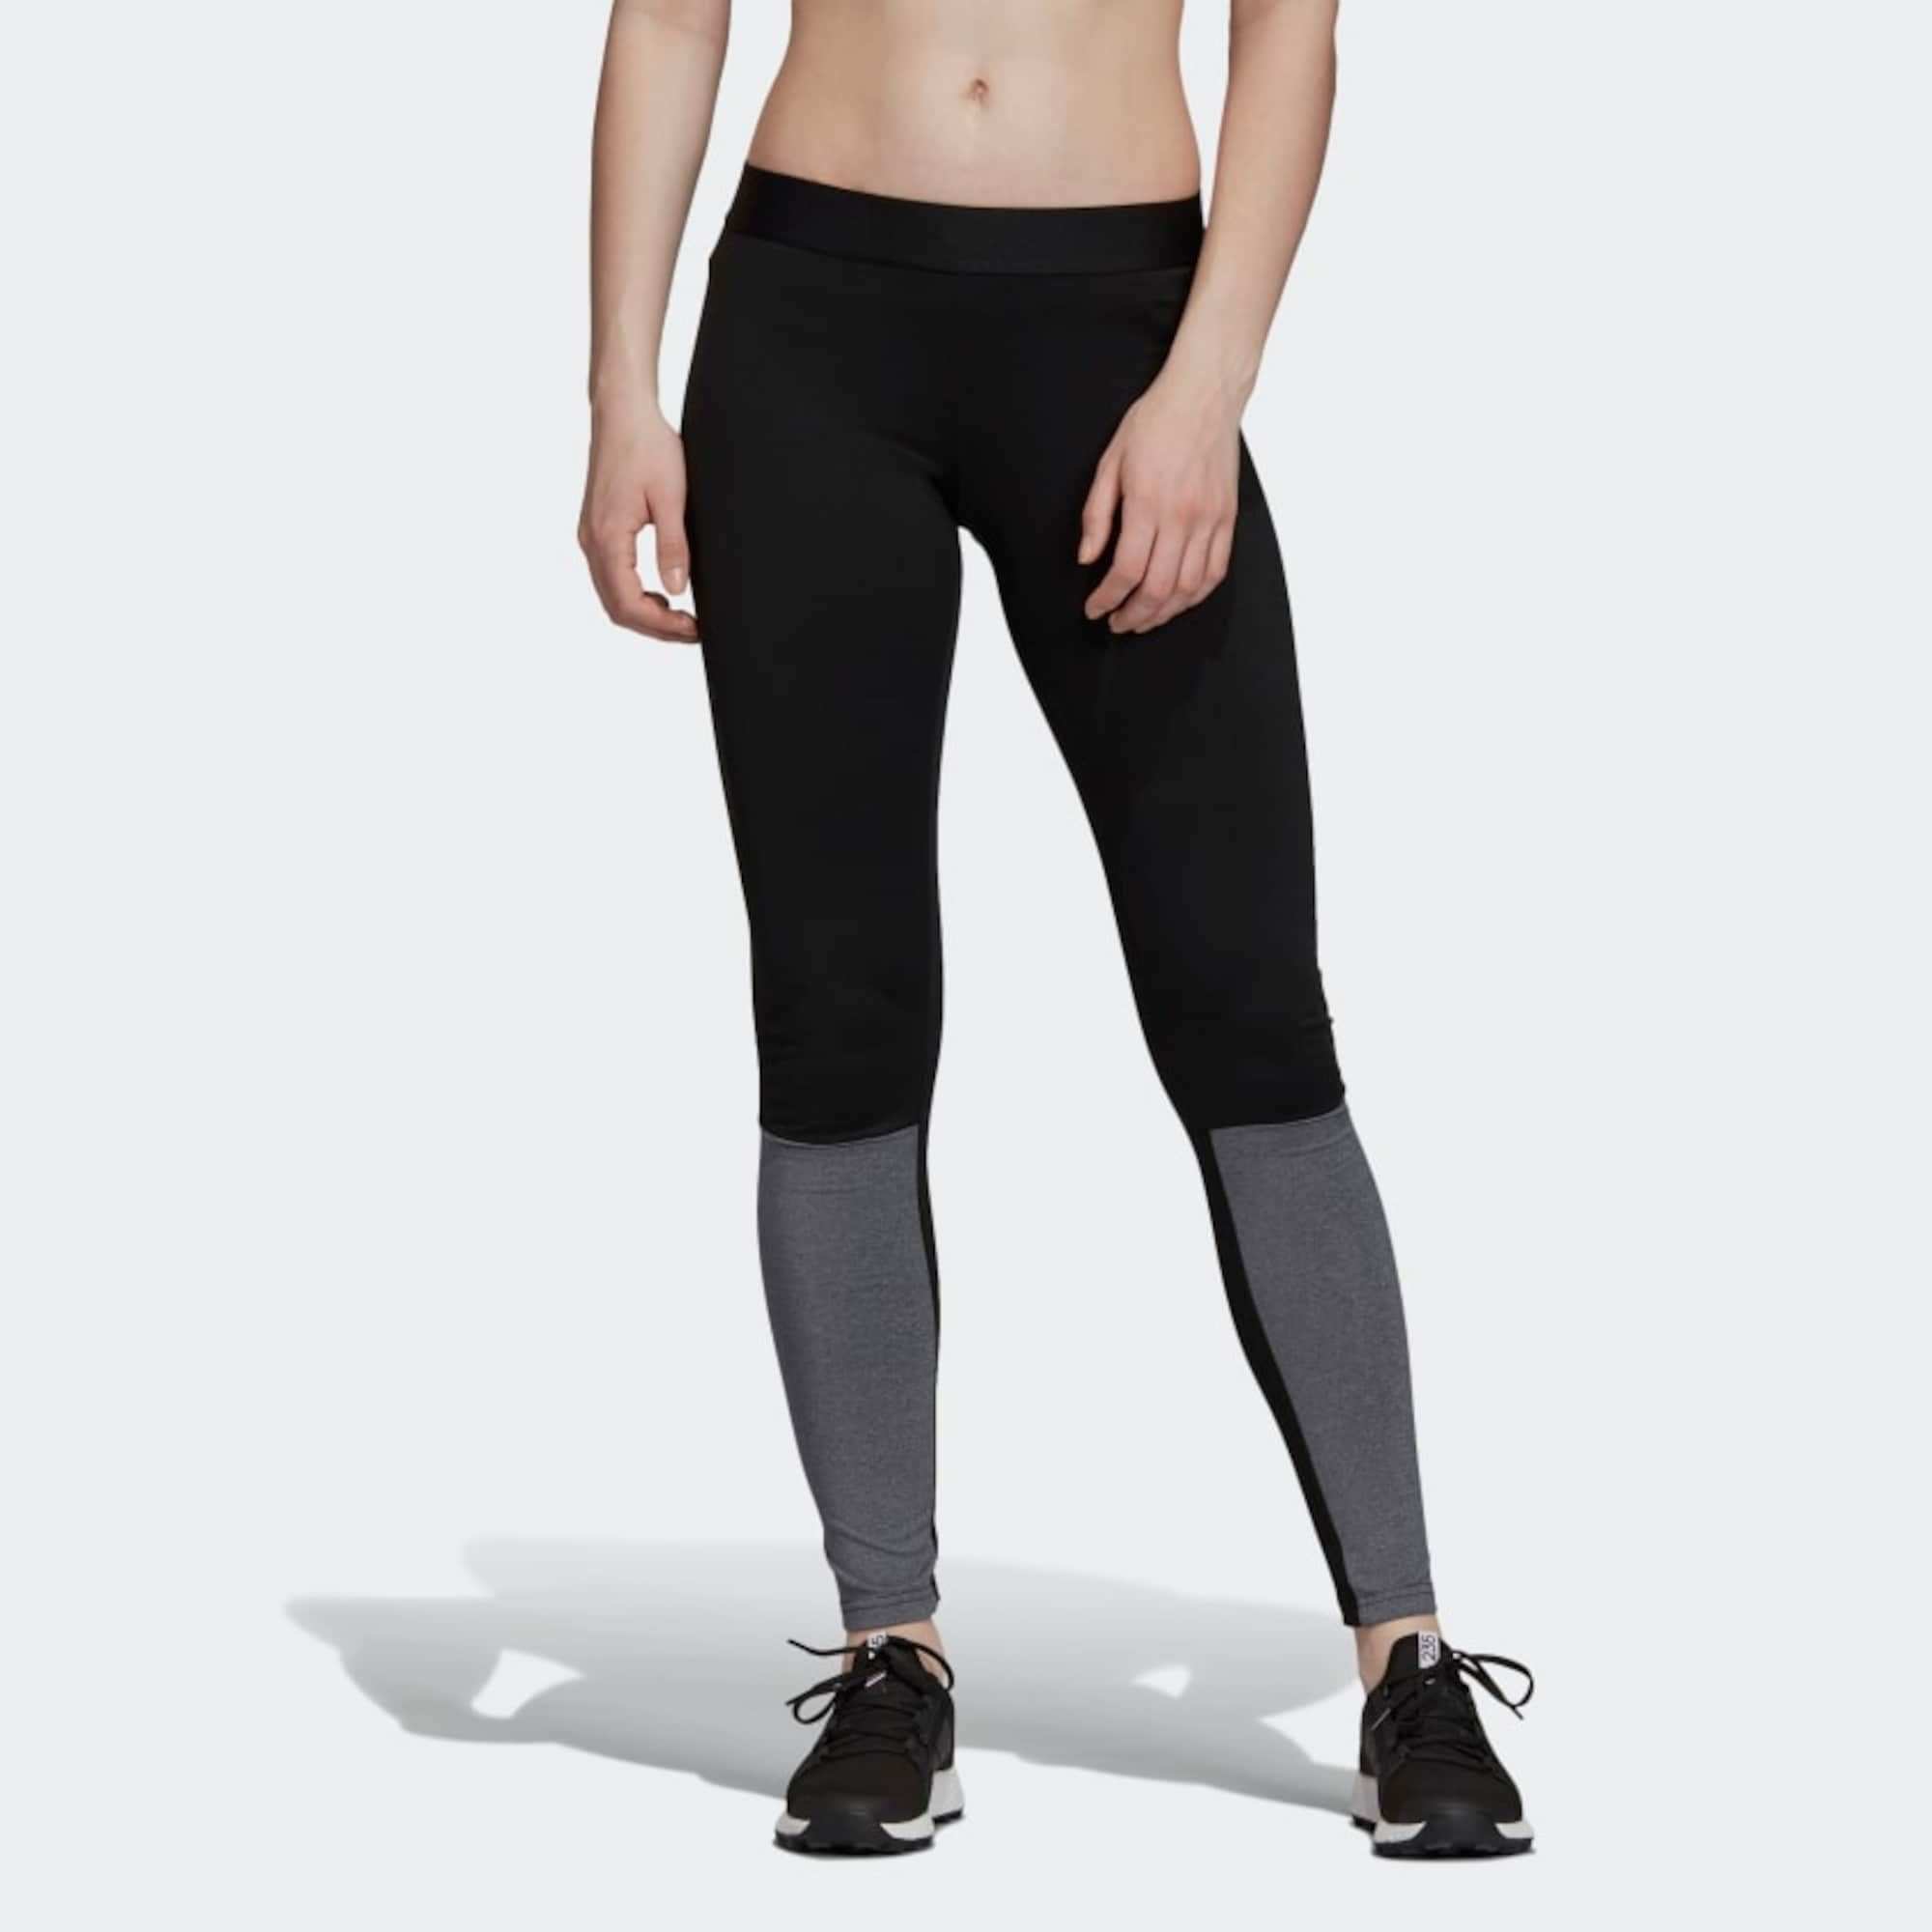 Adidas Performance Tights Damen Schwarz Grosse Xs S Farben Pro Pack Eine Farbe Pro Pack Material Weiteres Material Futte In 2020 Black Adidas Black Tights Tights